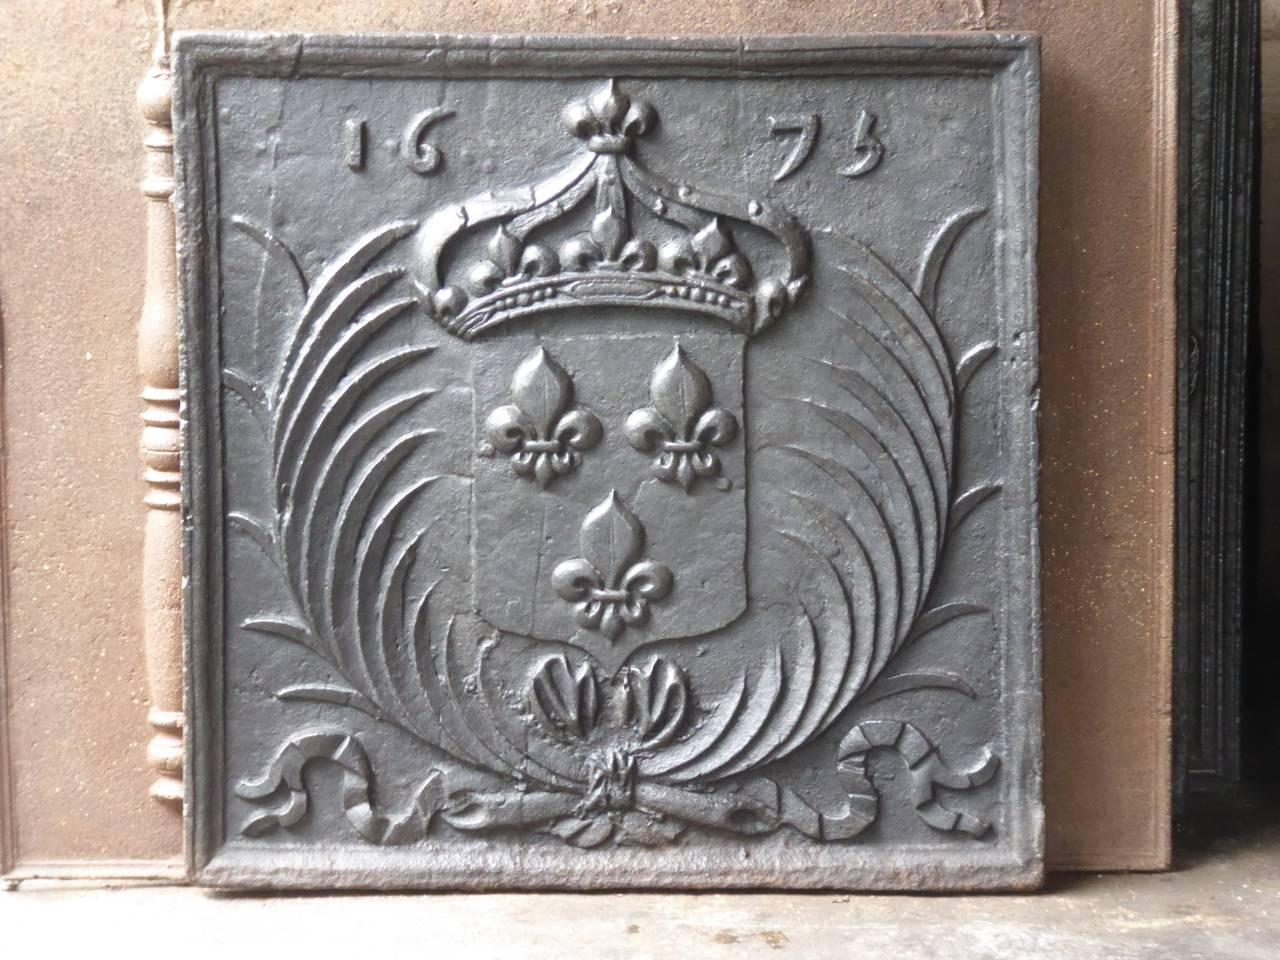 17th century French fireback with the arms of France. The fireback is cast in 1675. Coat of arms of the House of Bourbon, an originally French royal house that became a major dynasty in Europe. It delivered kings for Spain (Navarra), France, both